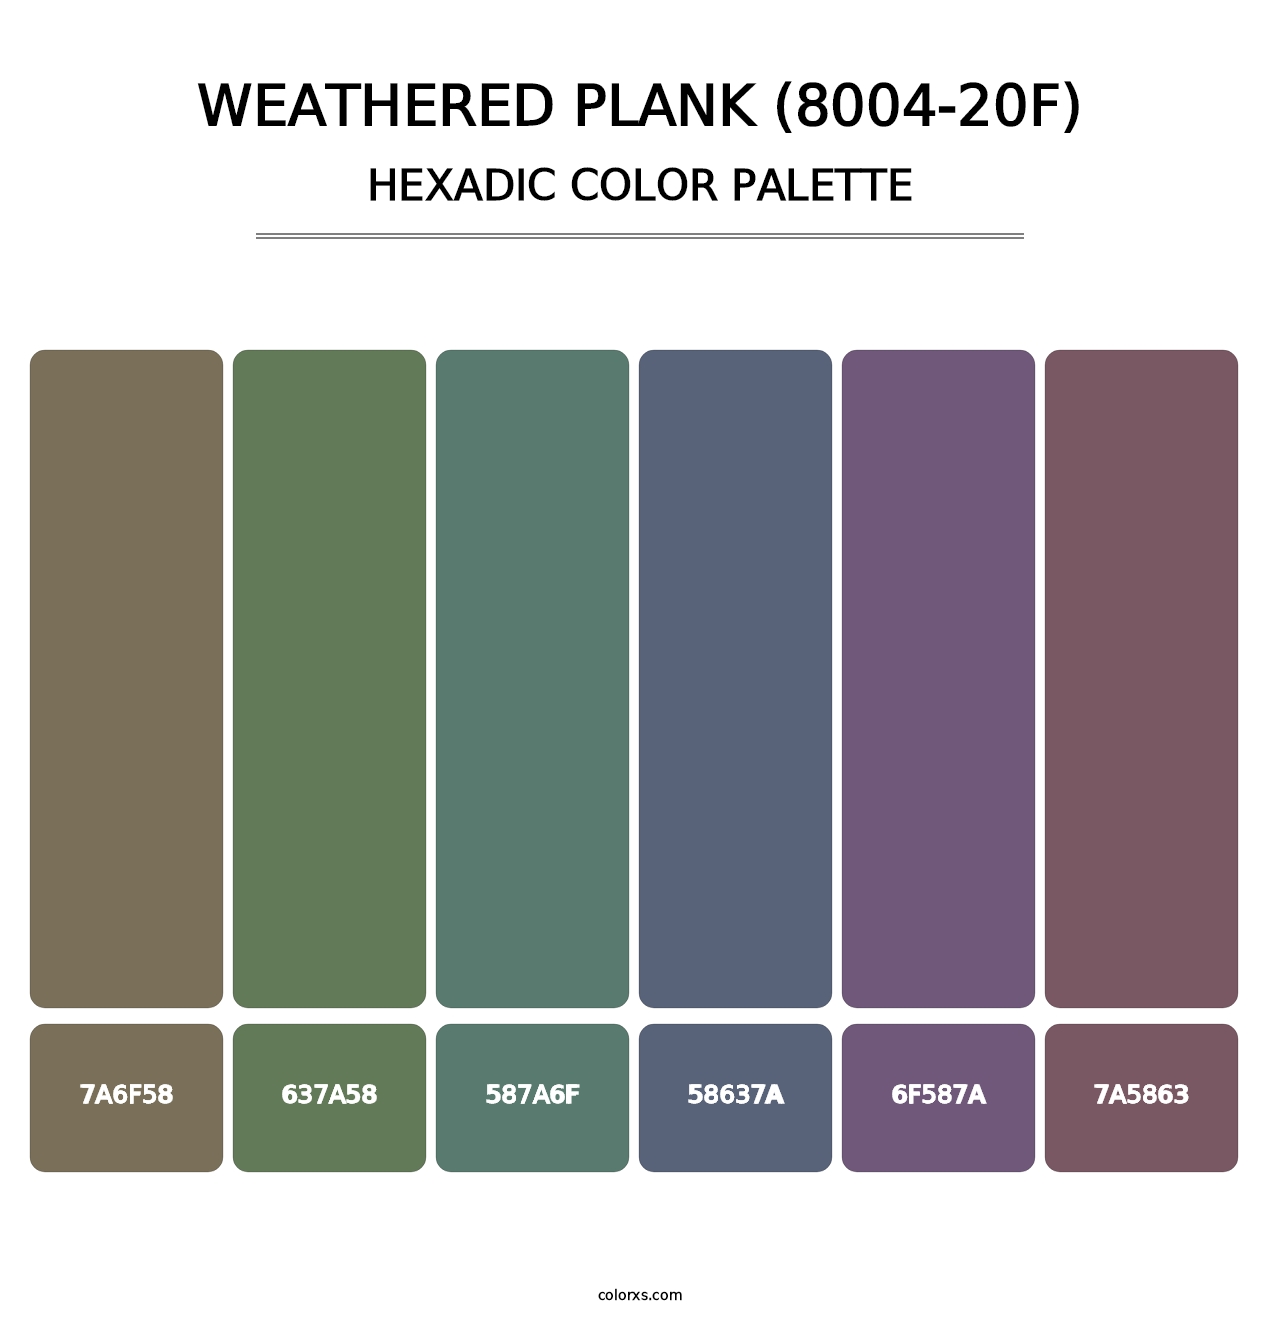 Weathered Plank (8004-20F) - Hexadic Color Palette